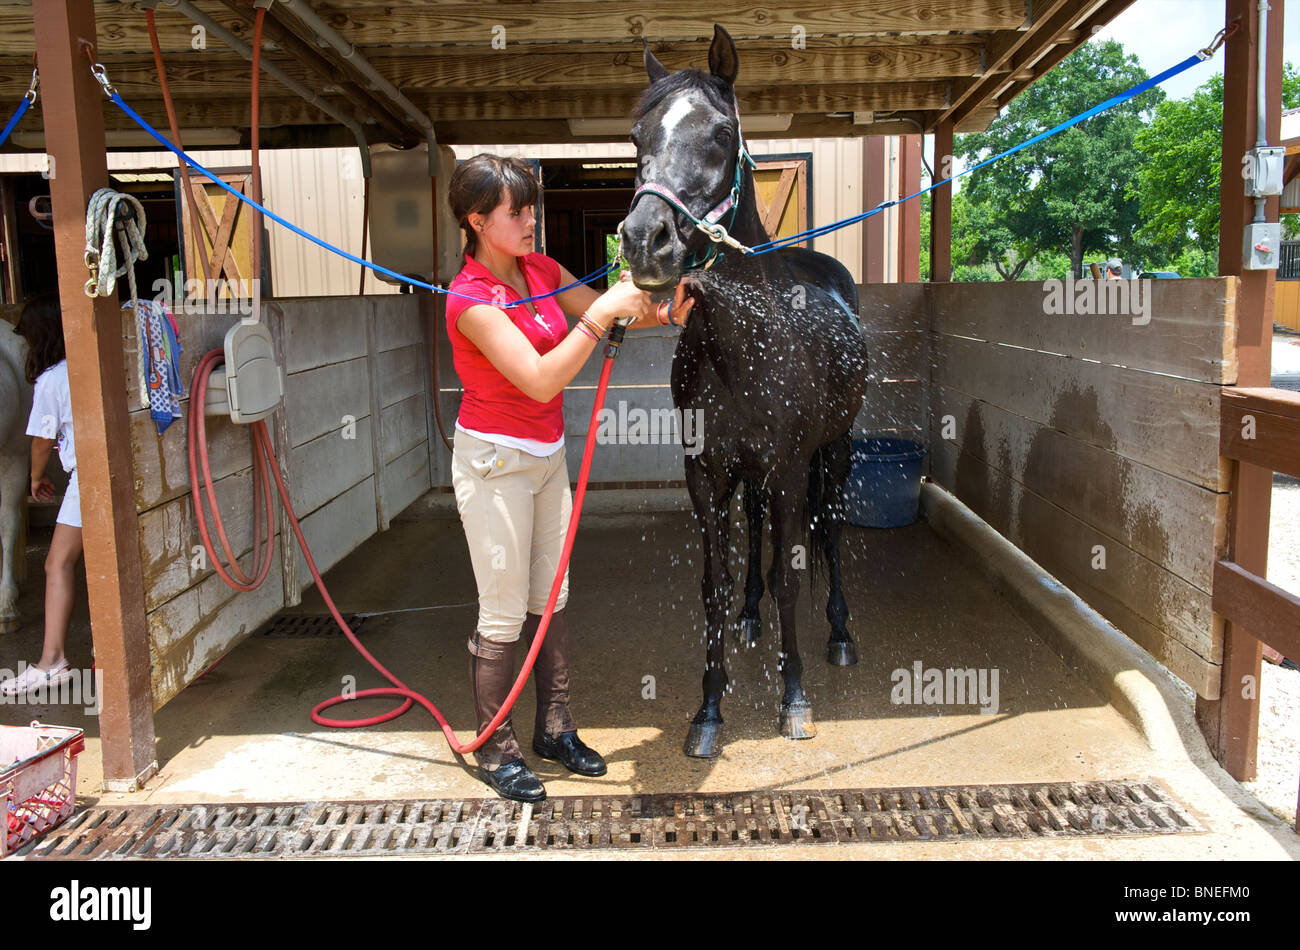 Teenage girl washing her horse after riding, Houston, Texas, North America, USA Stock Photo